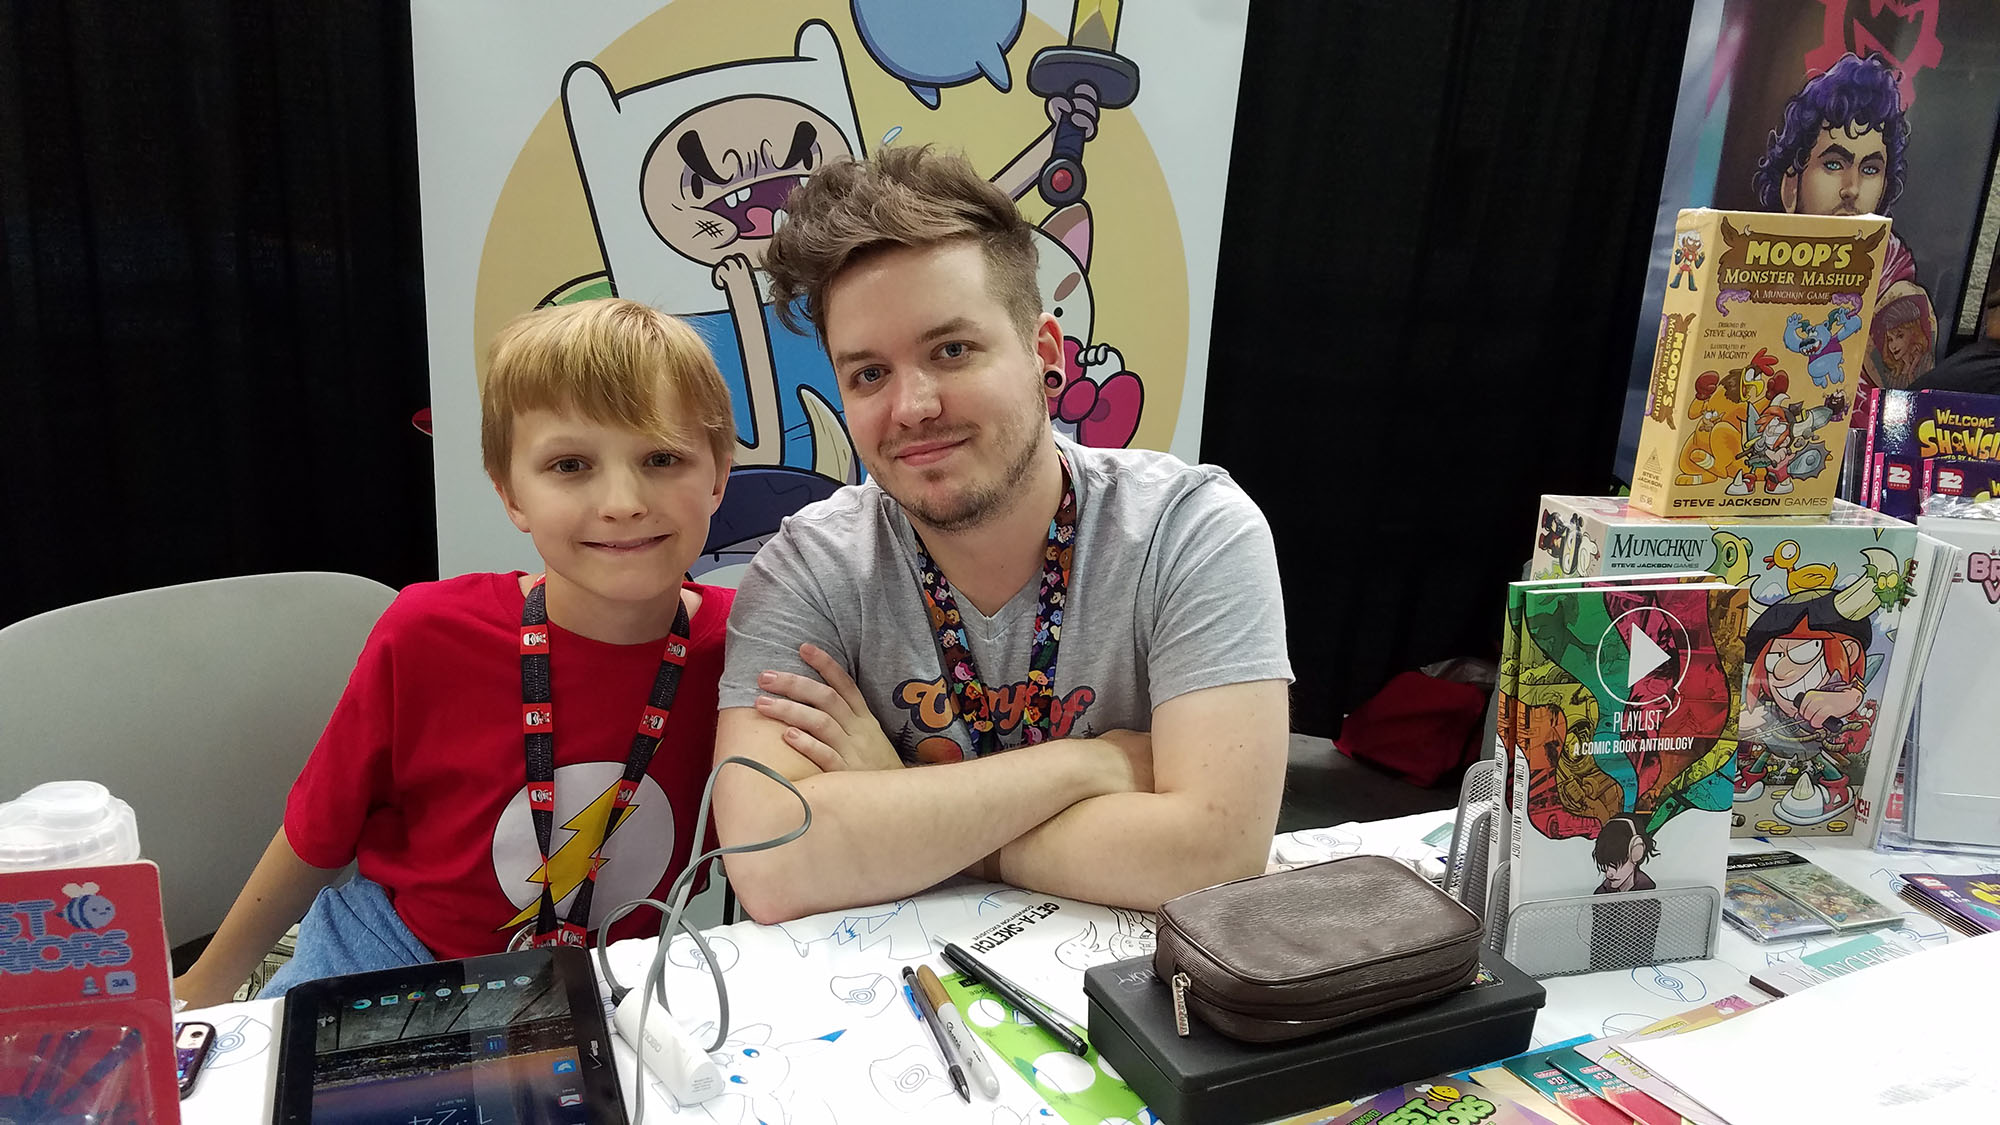 Ian McGinty: Making a Career Out of Comics